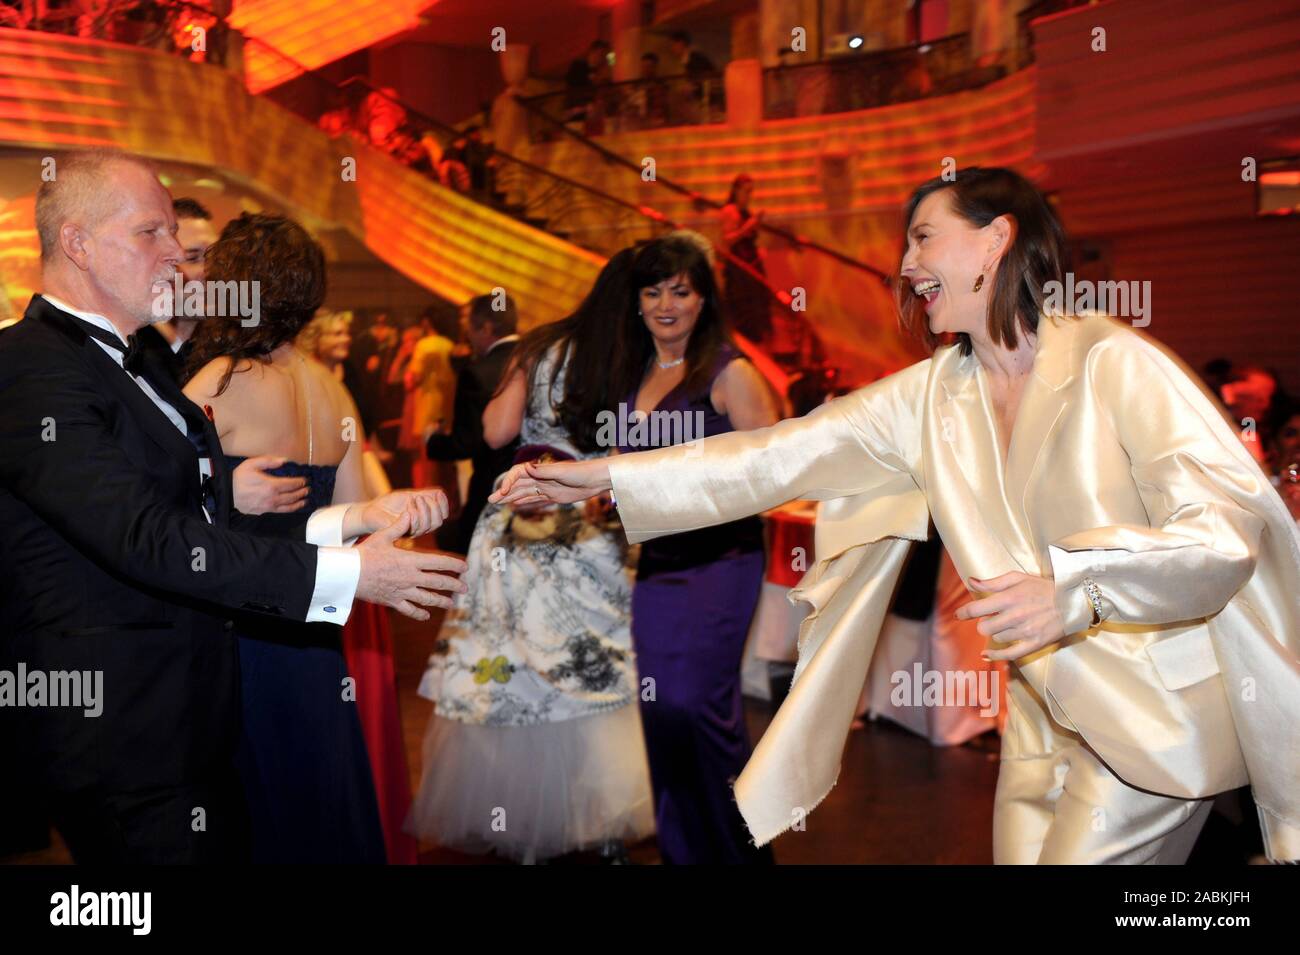 Vincent de la Tour (Twentieth Century Fox) and Christiane Paul dance at the 46th German Film Ball at the Hotel Bayerischer Hof in Munich. [automated translation] Stock Photo